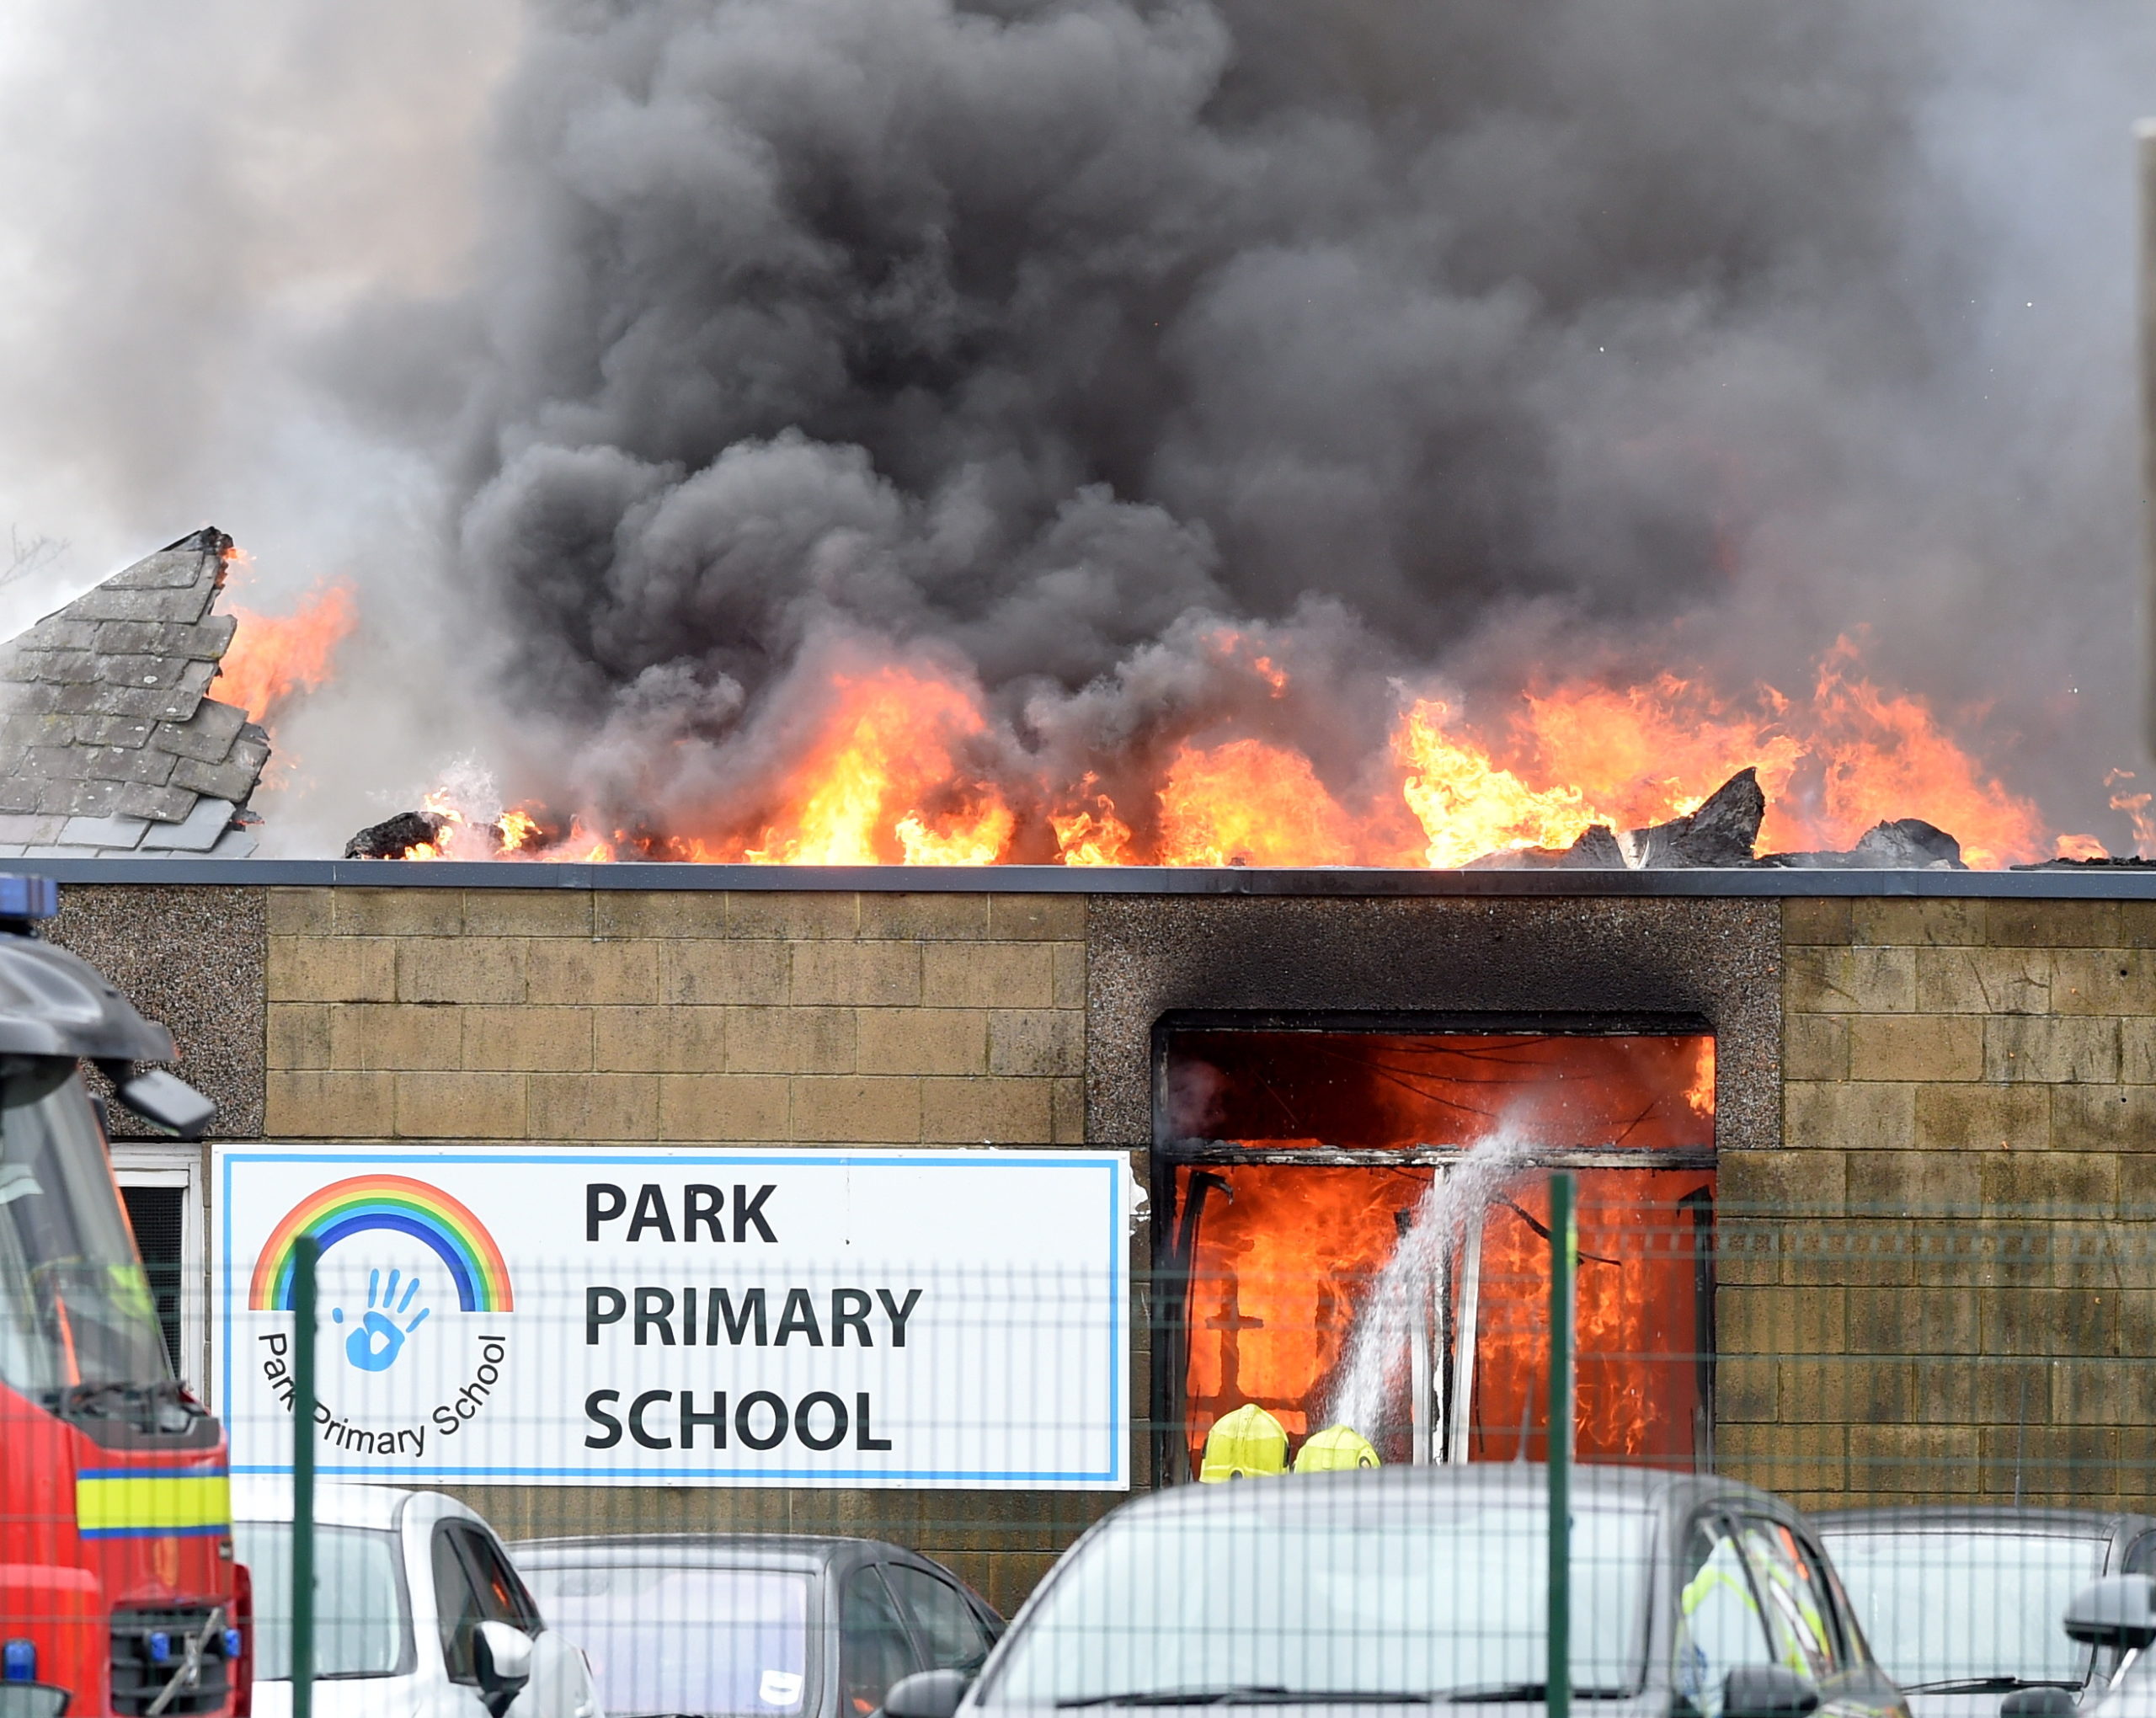 The fire at Park Primary School in Invergordon.
Pictures by Sandy McCook.